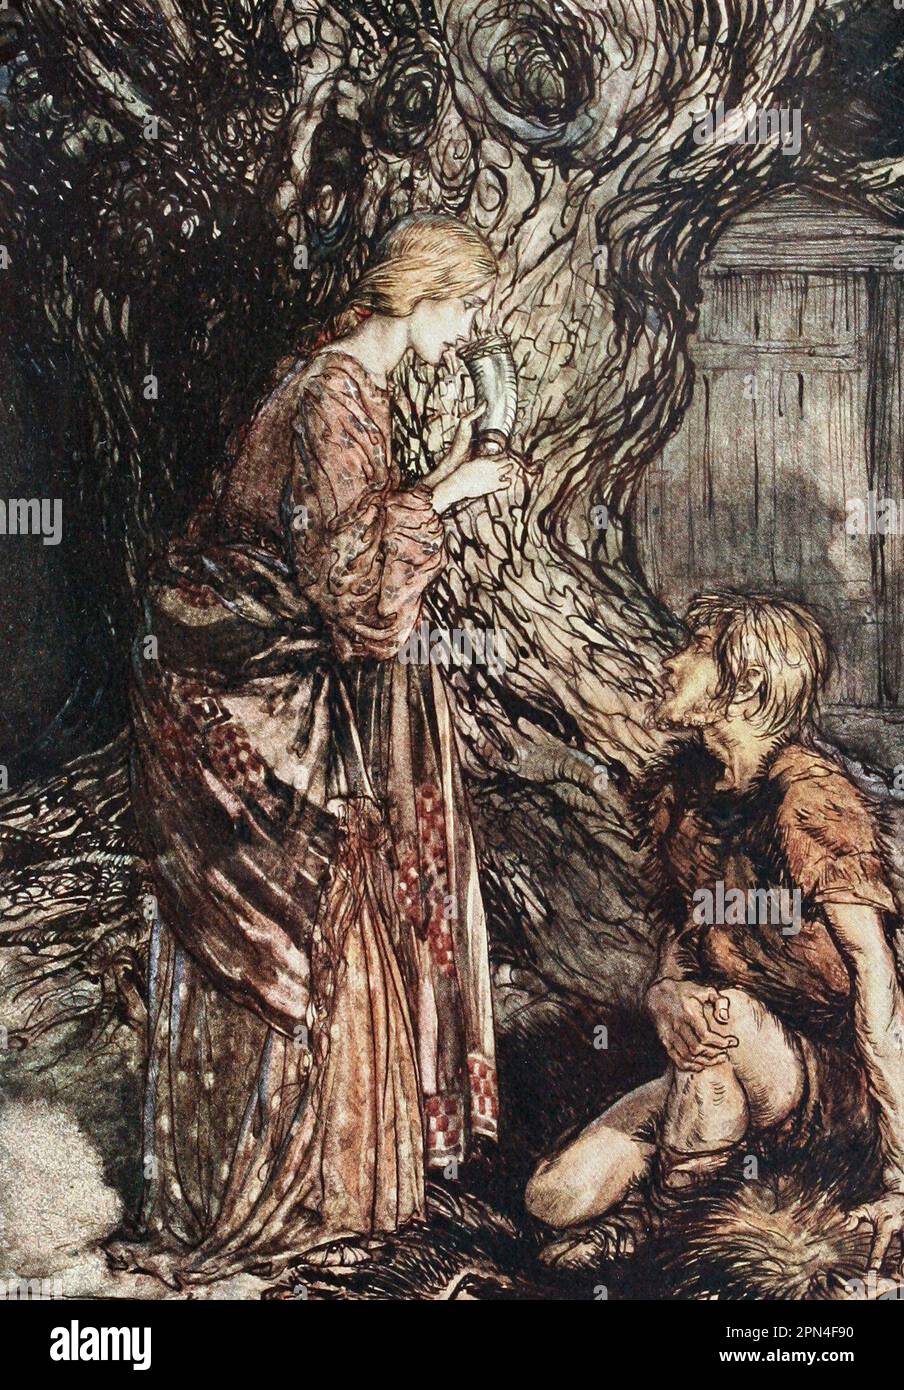 Siegmund and Sieglinde from Rhinegold (Ring of the Nibelung) - Sieglinde offers a drink and Siegmund asks her to put it to her lips first Stock Photo